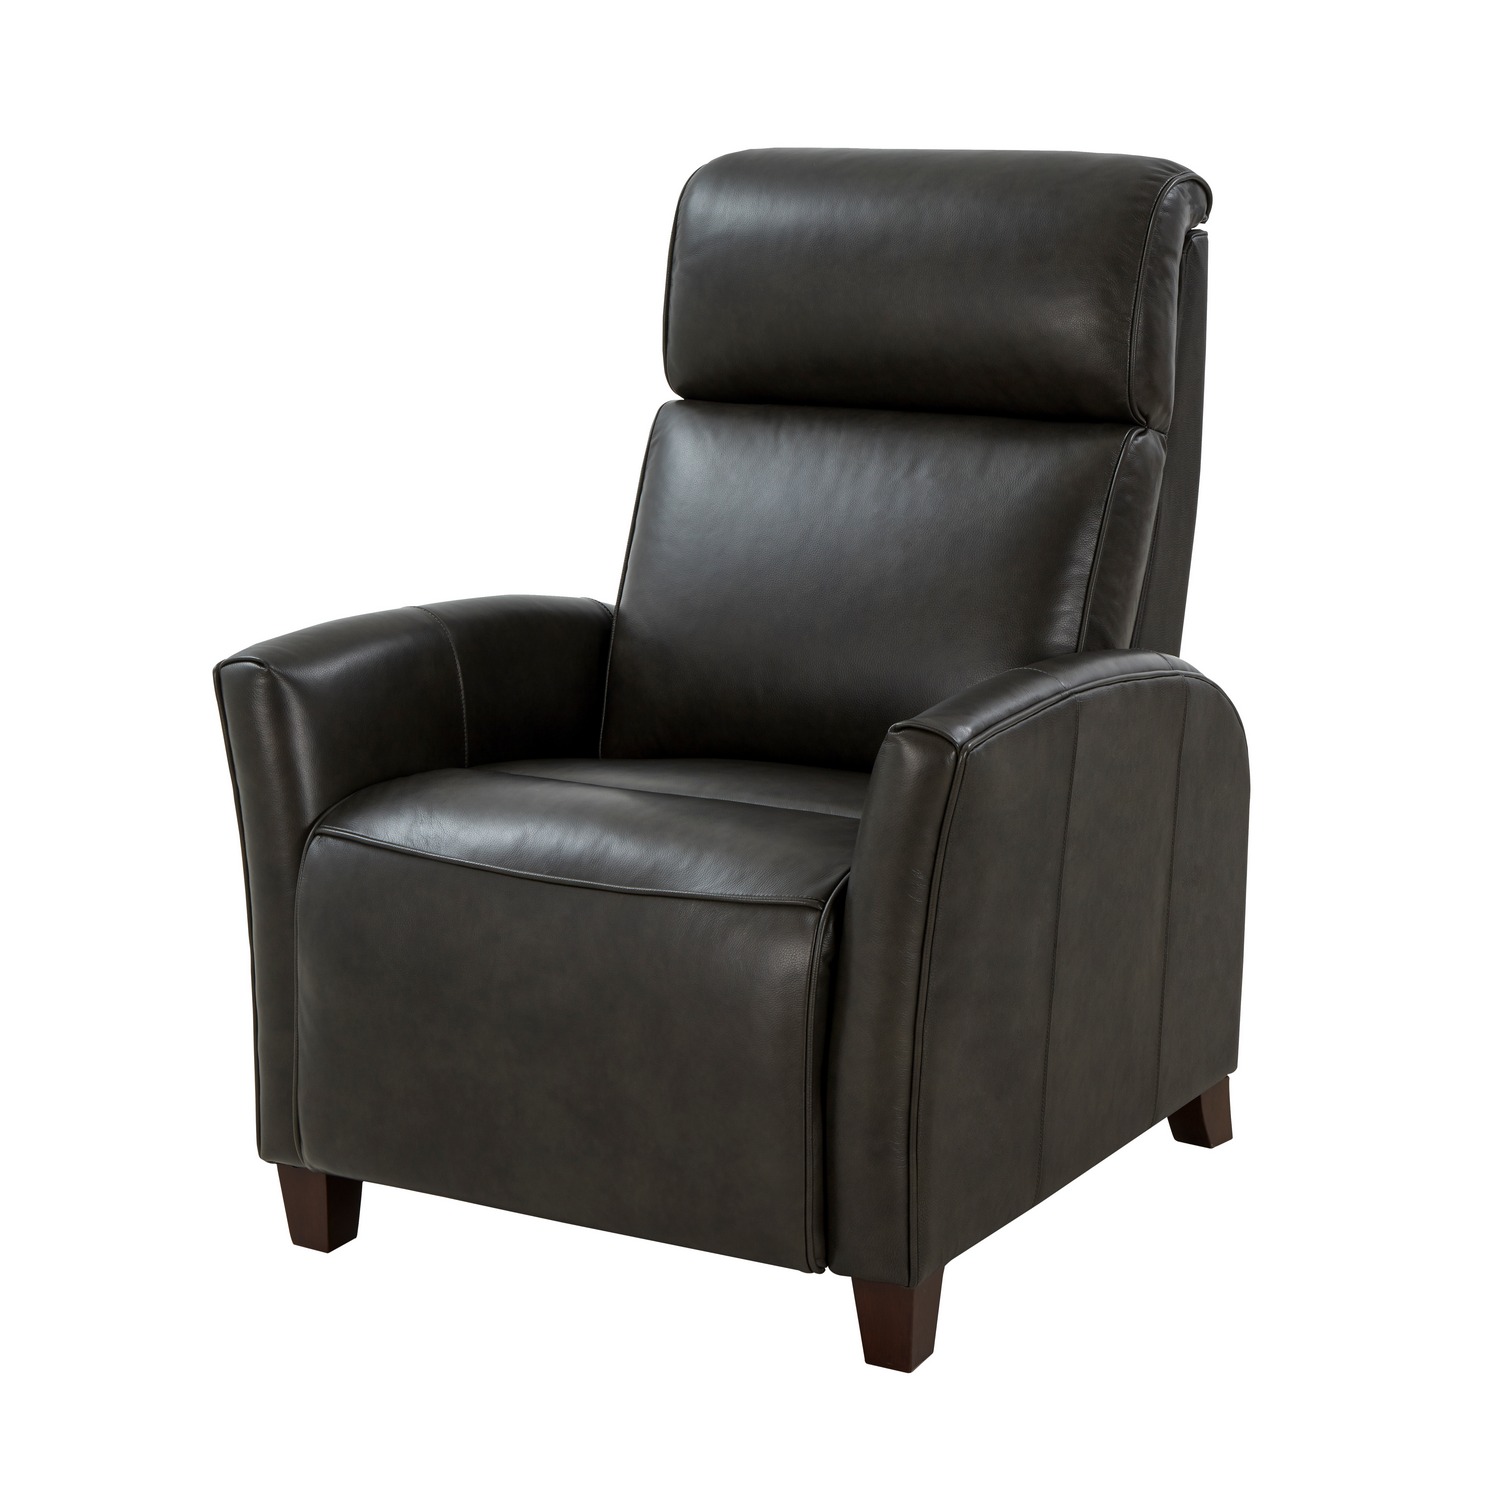 Barcalounger Jasmine Zero Gravity Power Recliner Chair with Power Head Rest and Lumbar - Ashford Graphite/All Leather